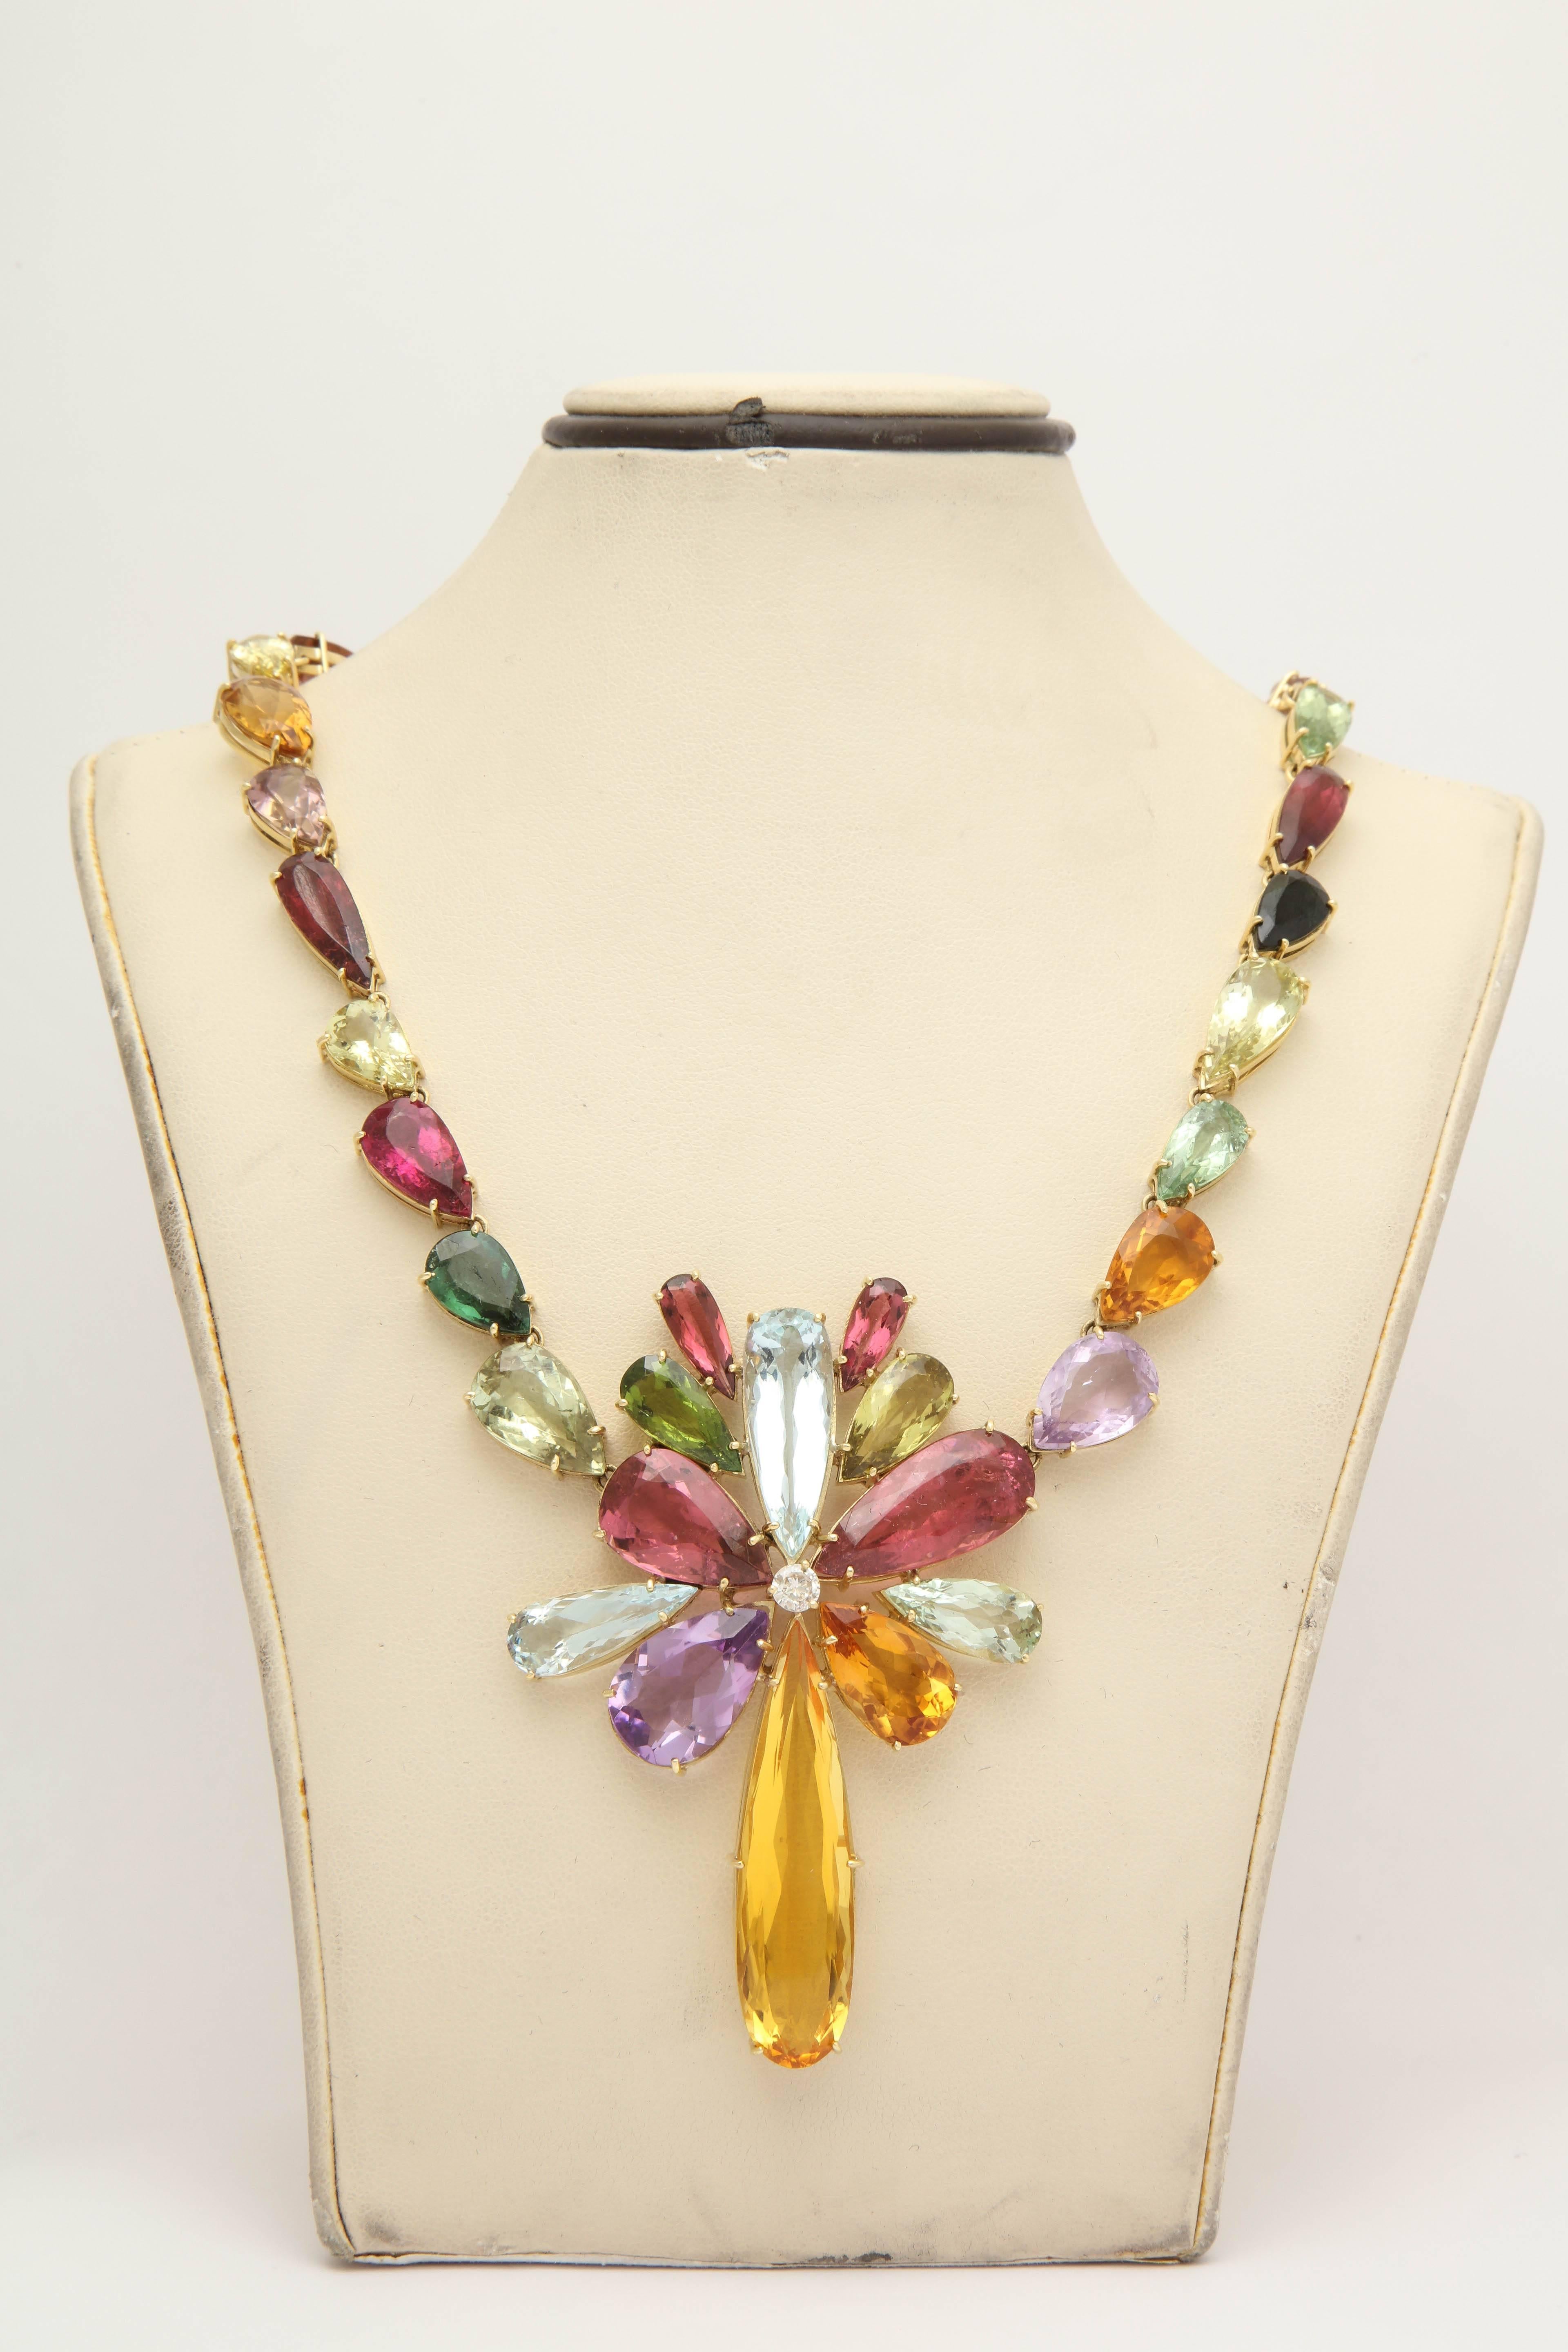 One Ladies Multicolored Stone Necklace Designed With 195 Carats Of Semi Precious Stones Consisting Of Pear Cut Aquamarines,Citrines Pink Tourmalines,Green Tourmalines,Amethysts And Garnet Stones Thruout.The Neckpiece Is Centering a .25 carat High